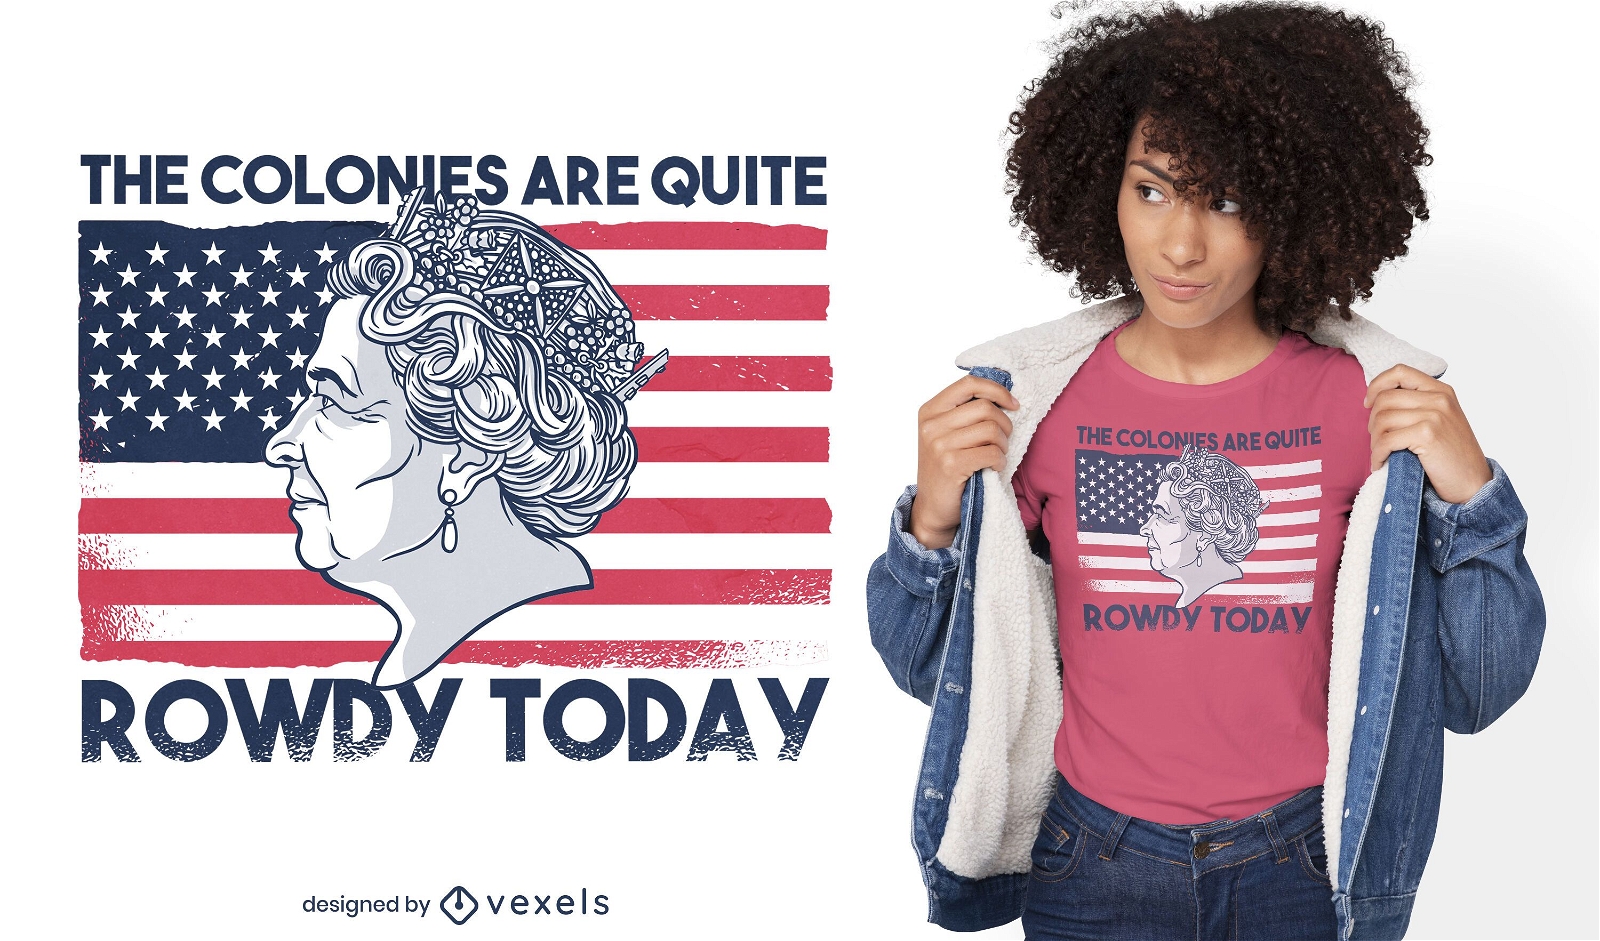 Queen of england on american flag t-shirt design